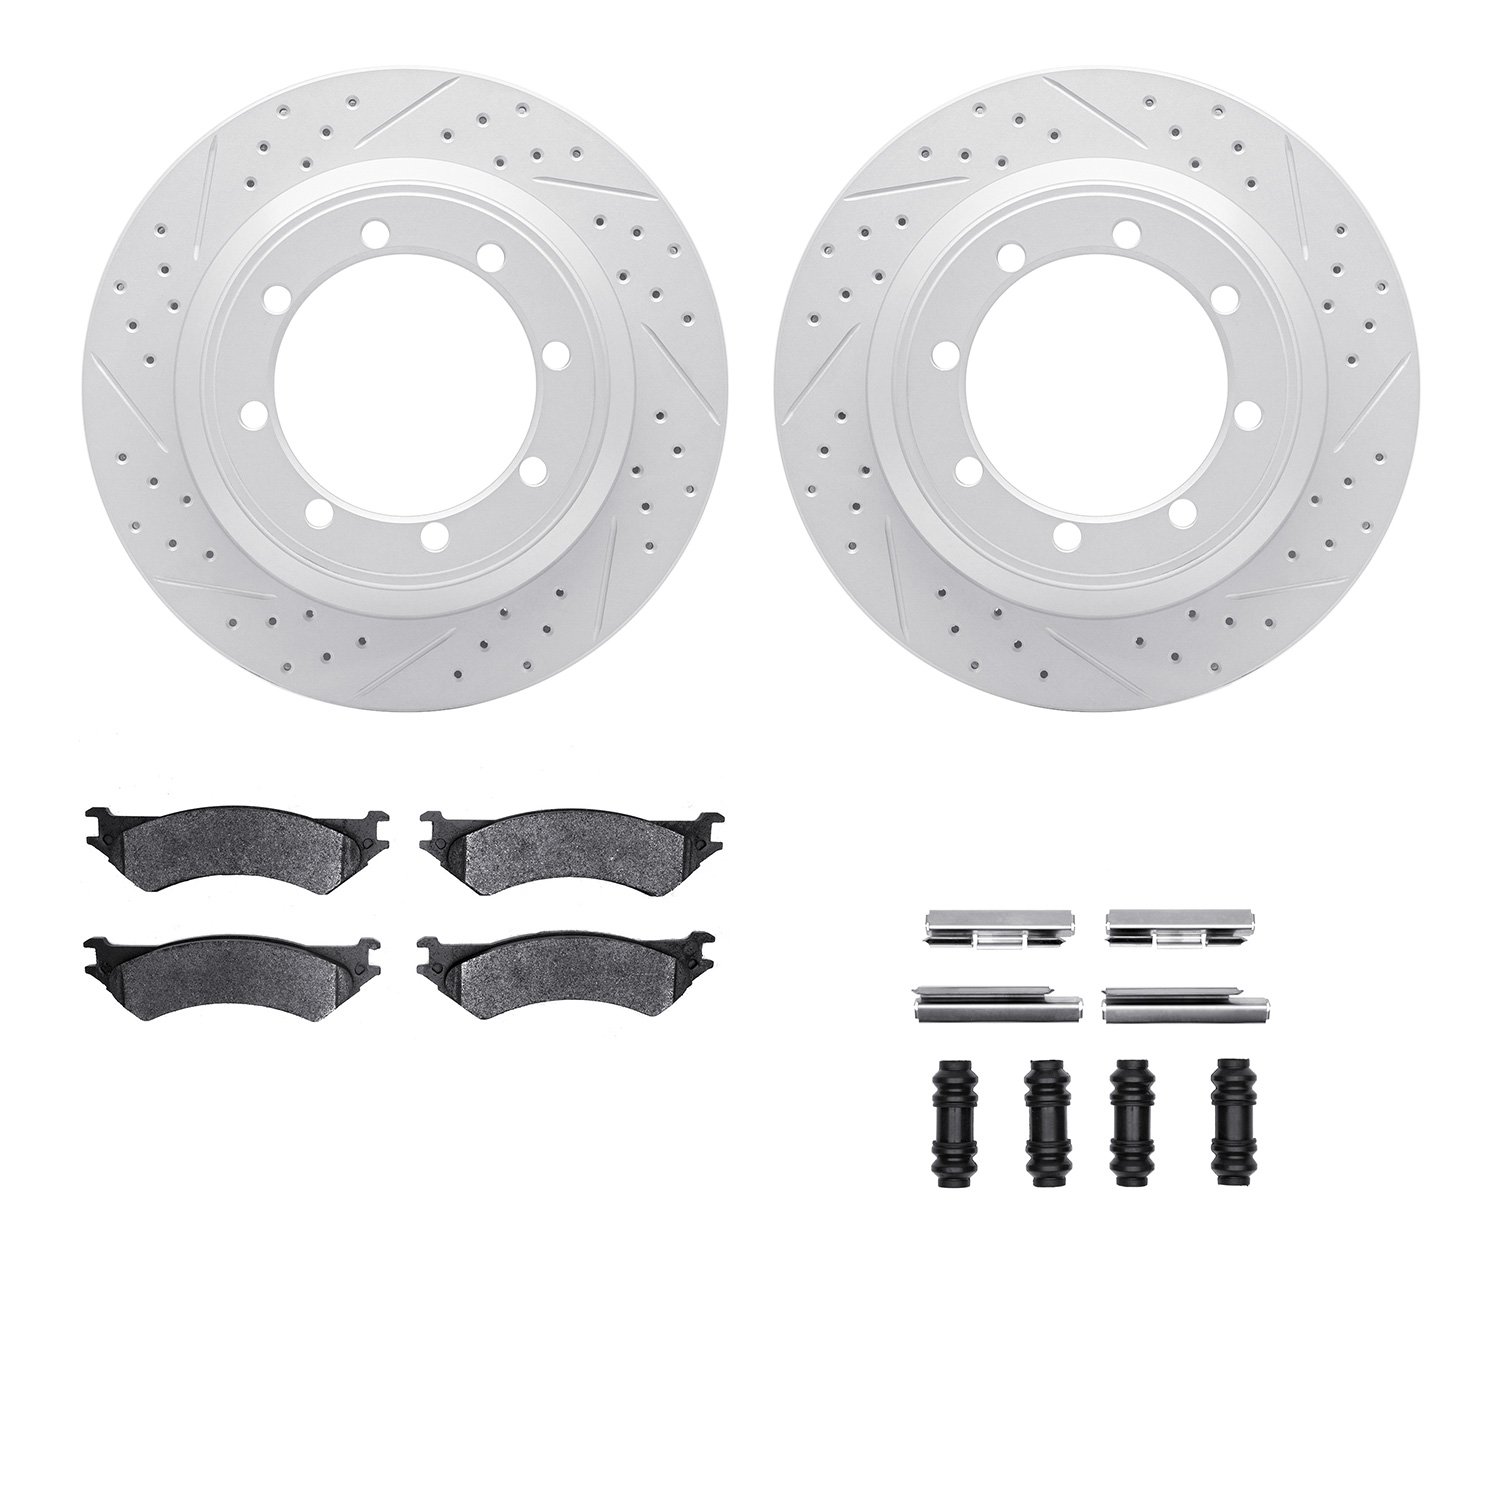 2212-99111 Geoperformance Drilled/Slotted Rotors w/Heavy-Duty Pads Kit & Hardware, 1999-2007 Ford/Lincoln/Mercury/Mazda, Positio